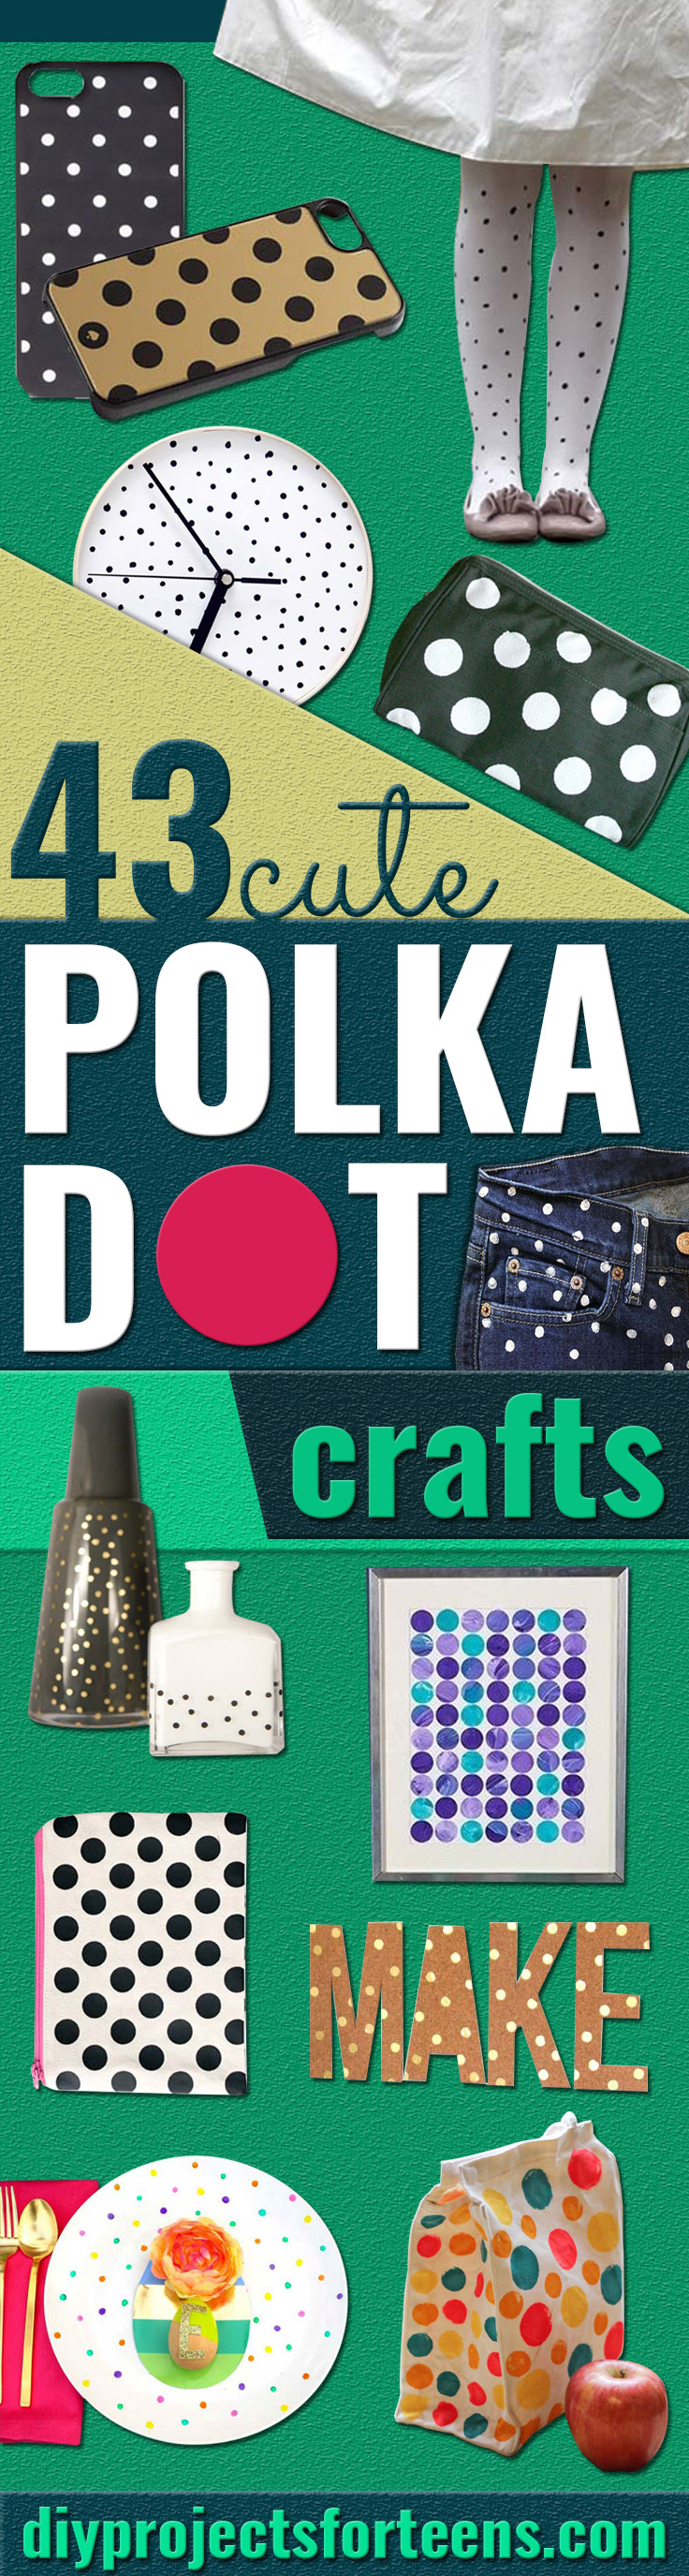 DIY Polka Dot Crafts and Projects - Cool Clothes, Room and Home Decor, Wall Art, Mason Jars and Party Ideas, Canvas, Fabric and Paint Project Tutorials - Fun Craft Ideas for Teens, Kids and Adults Make Awesome DIY Gifts